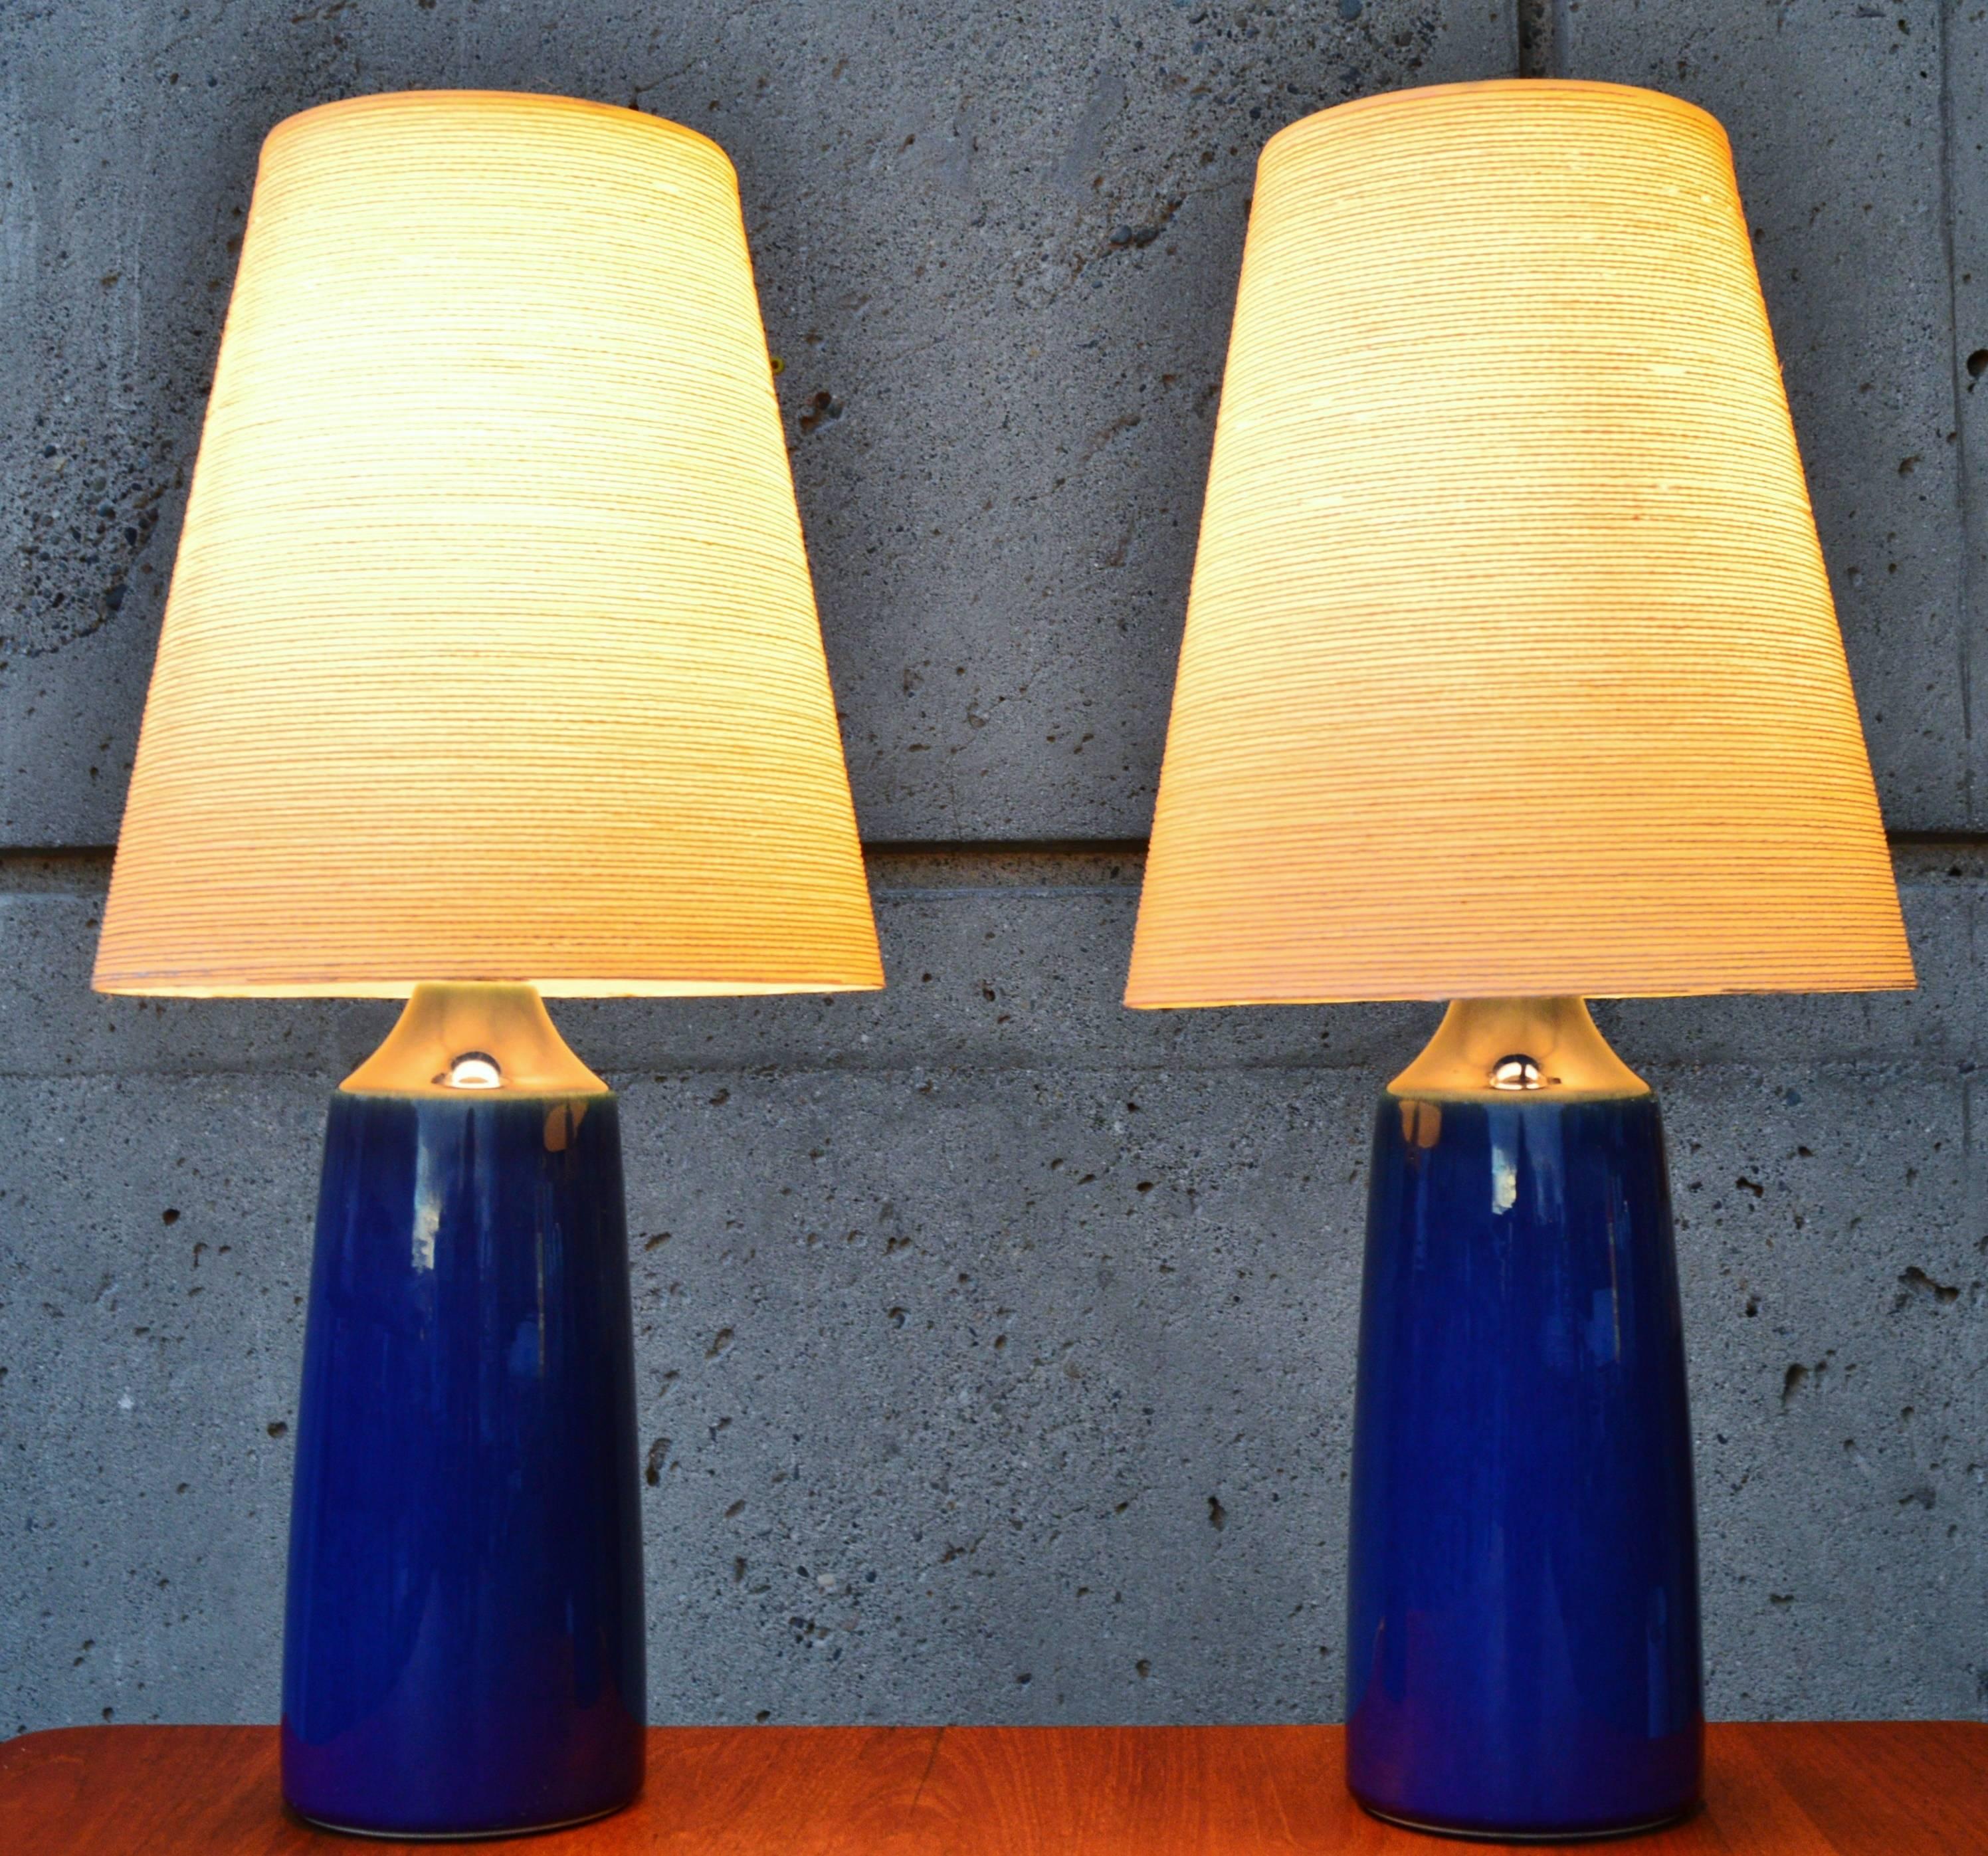 This hot pair of cobalt blue Danish Modern lamps were made by Lotte & Gunnar Bostlund. If you're not familiar with the stunning ceramic lamps designed and created by Lotte & Gunnar Bostland, originally of Denmark but who relocated their business to